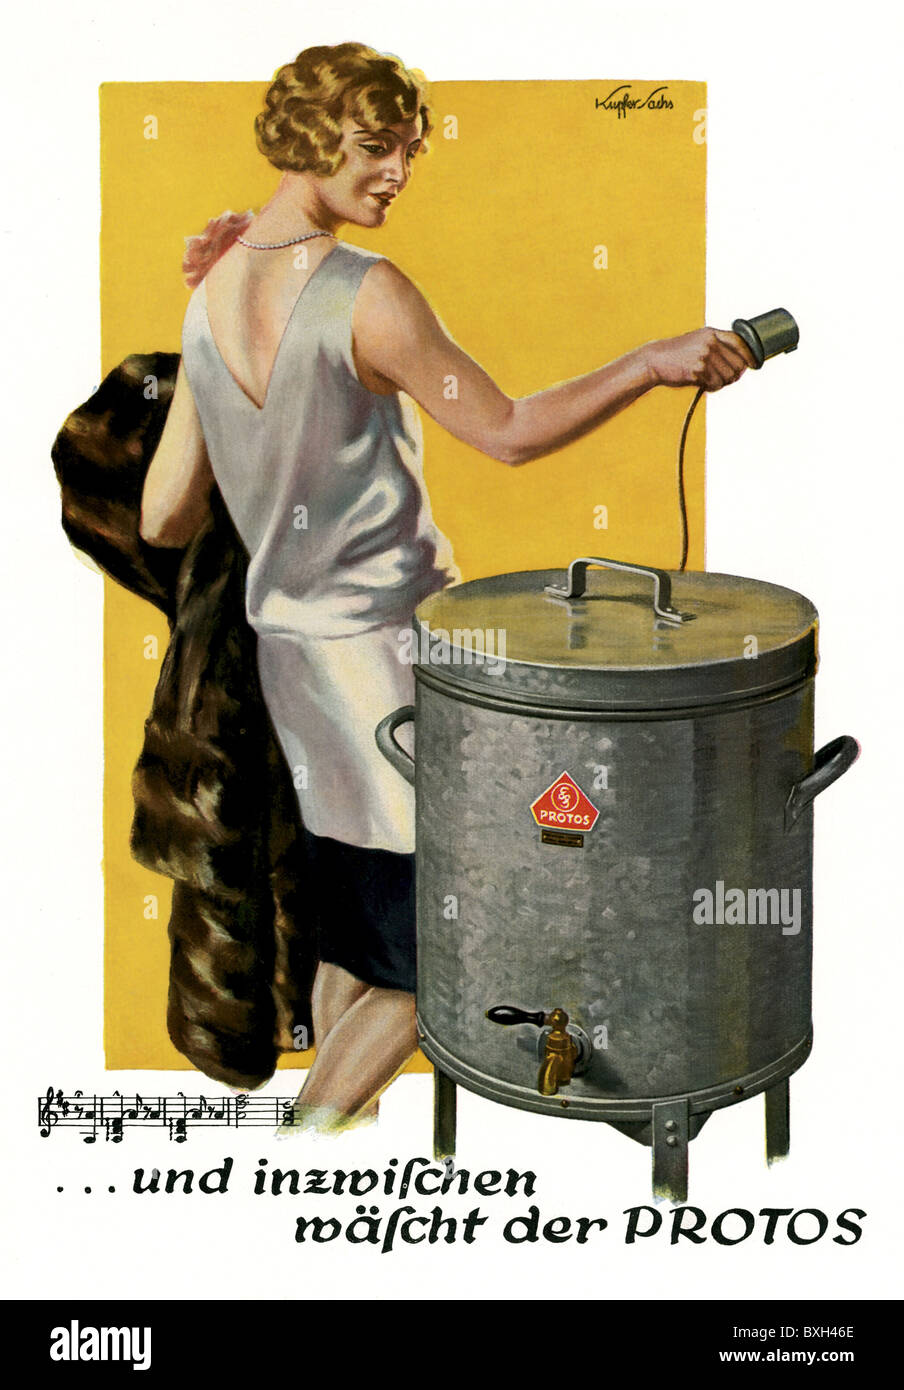 advertising, household applience, Siemens, automatic washing machine, Protos, Siemens & Halske, Germany, 1928, Additional-Rights-Clearences-Not Available Stock Photo